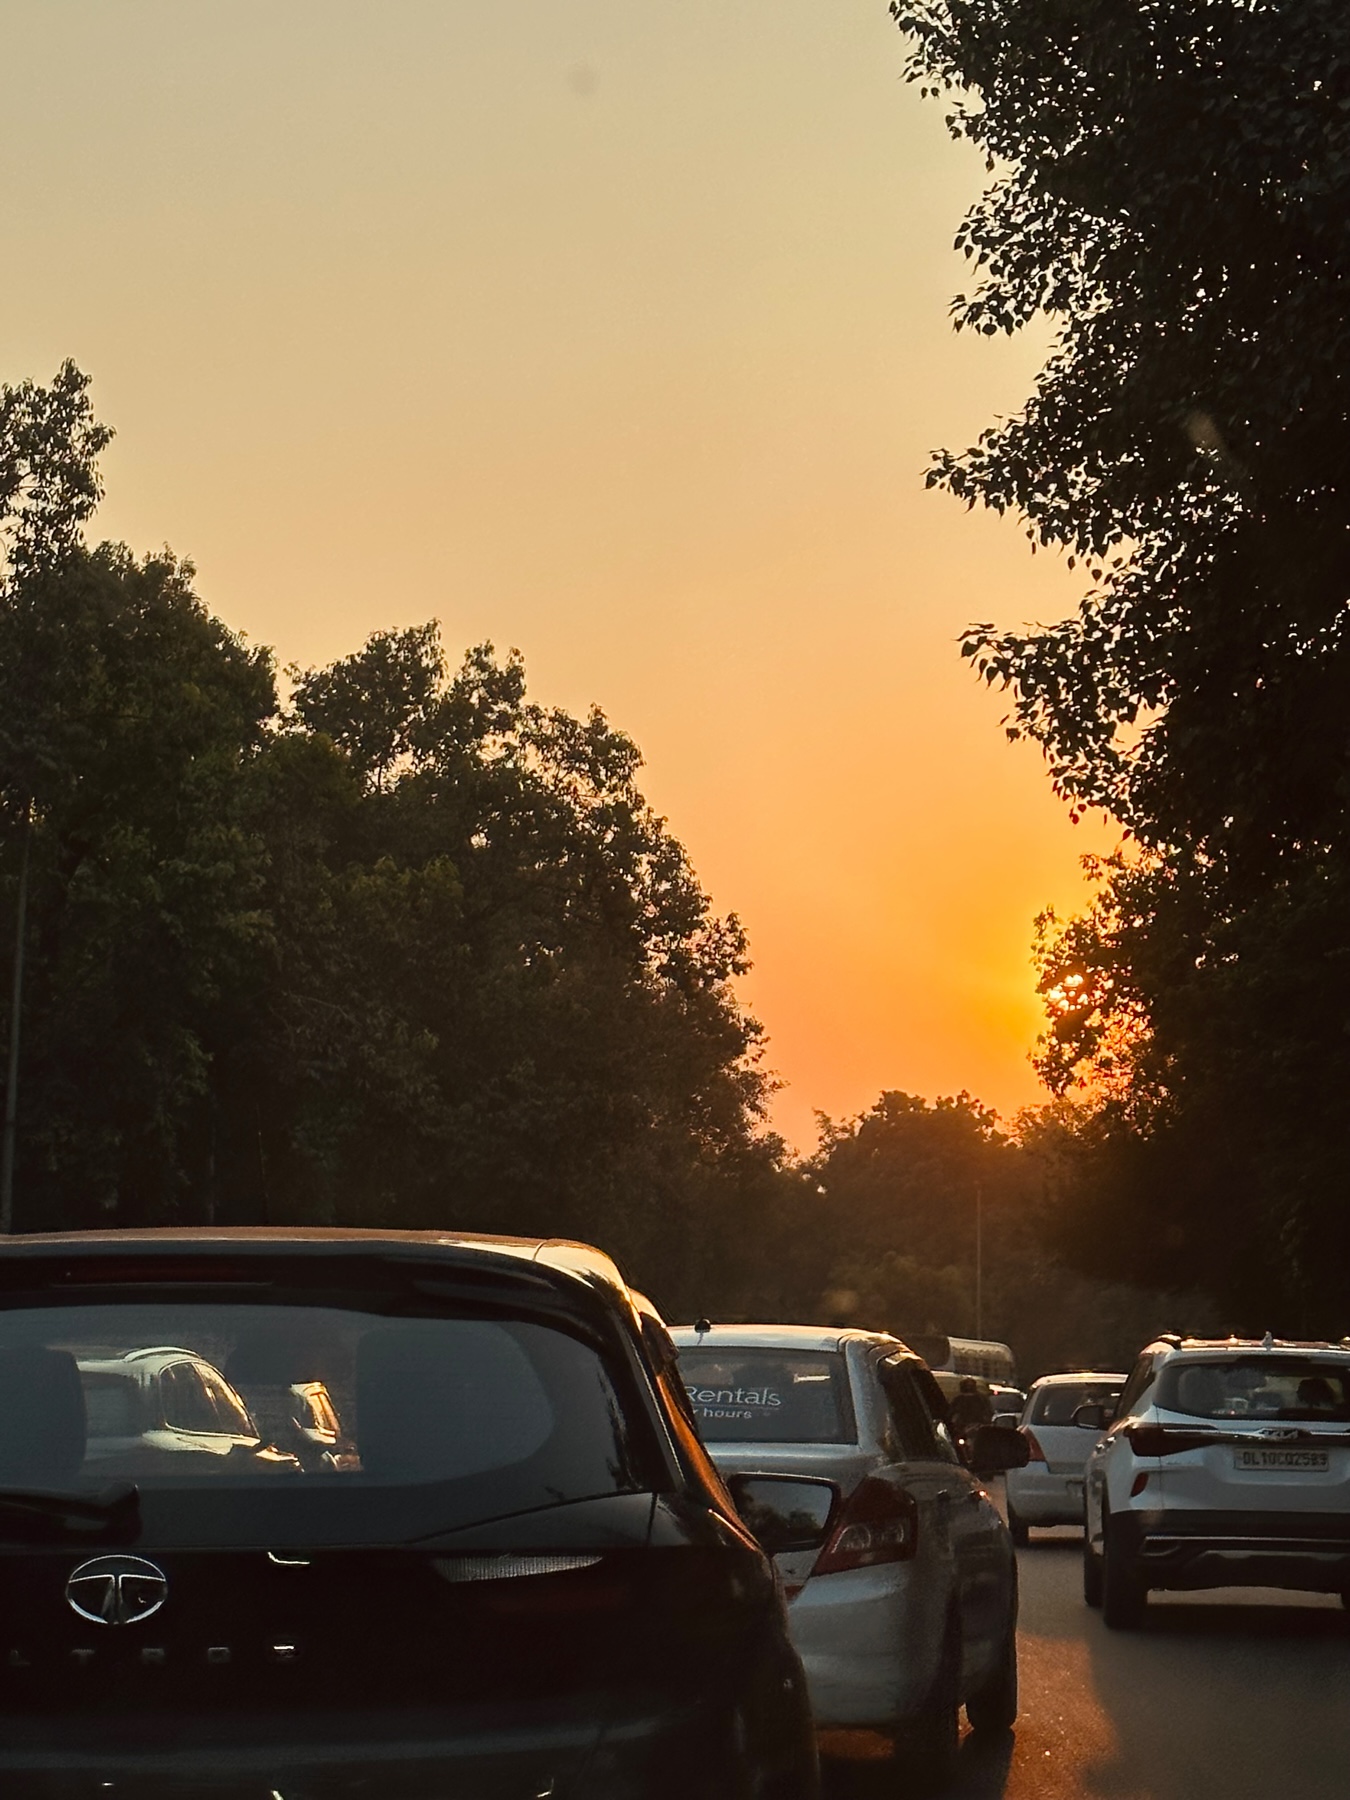 Golden hour sunlight through a hazy sky with trees silhouetted in the distance and cars in the foreground.